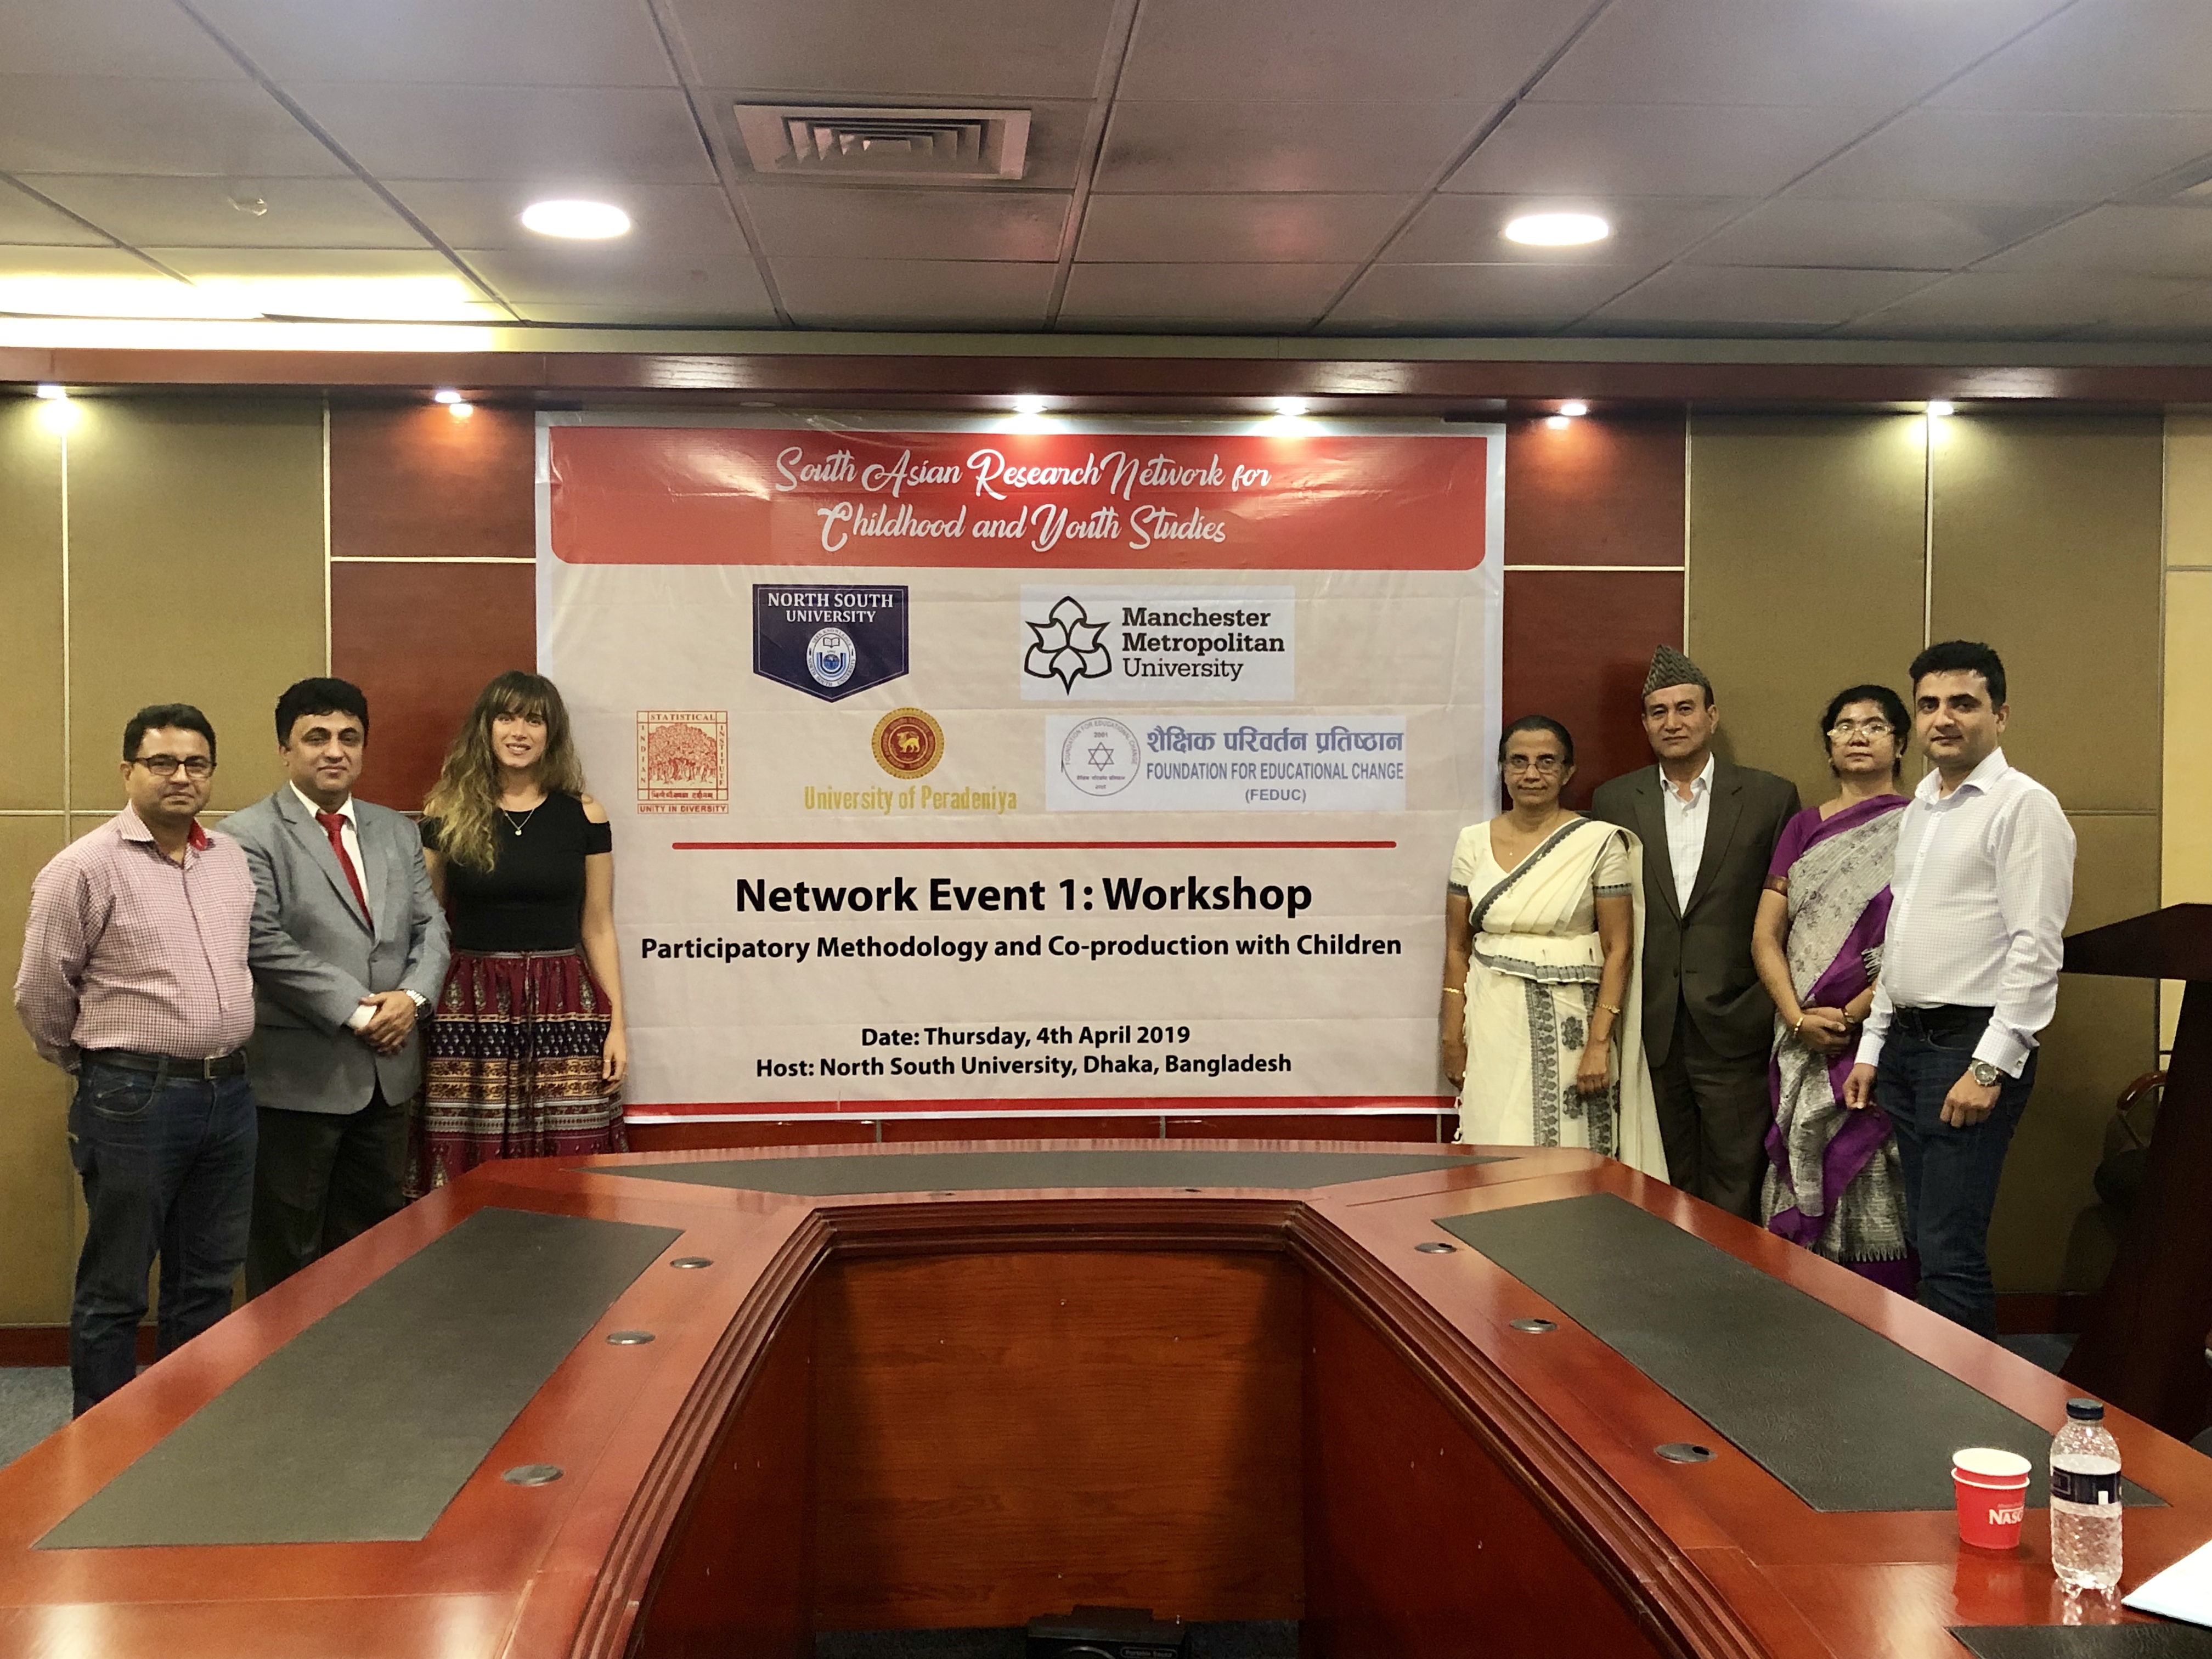 South Asian Research Network for Childhood and Youth Studies.